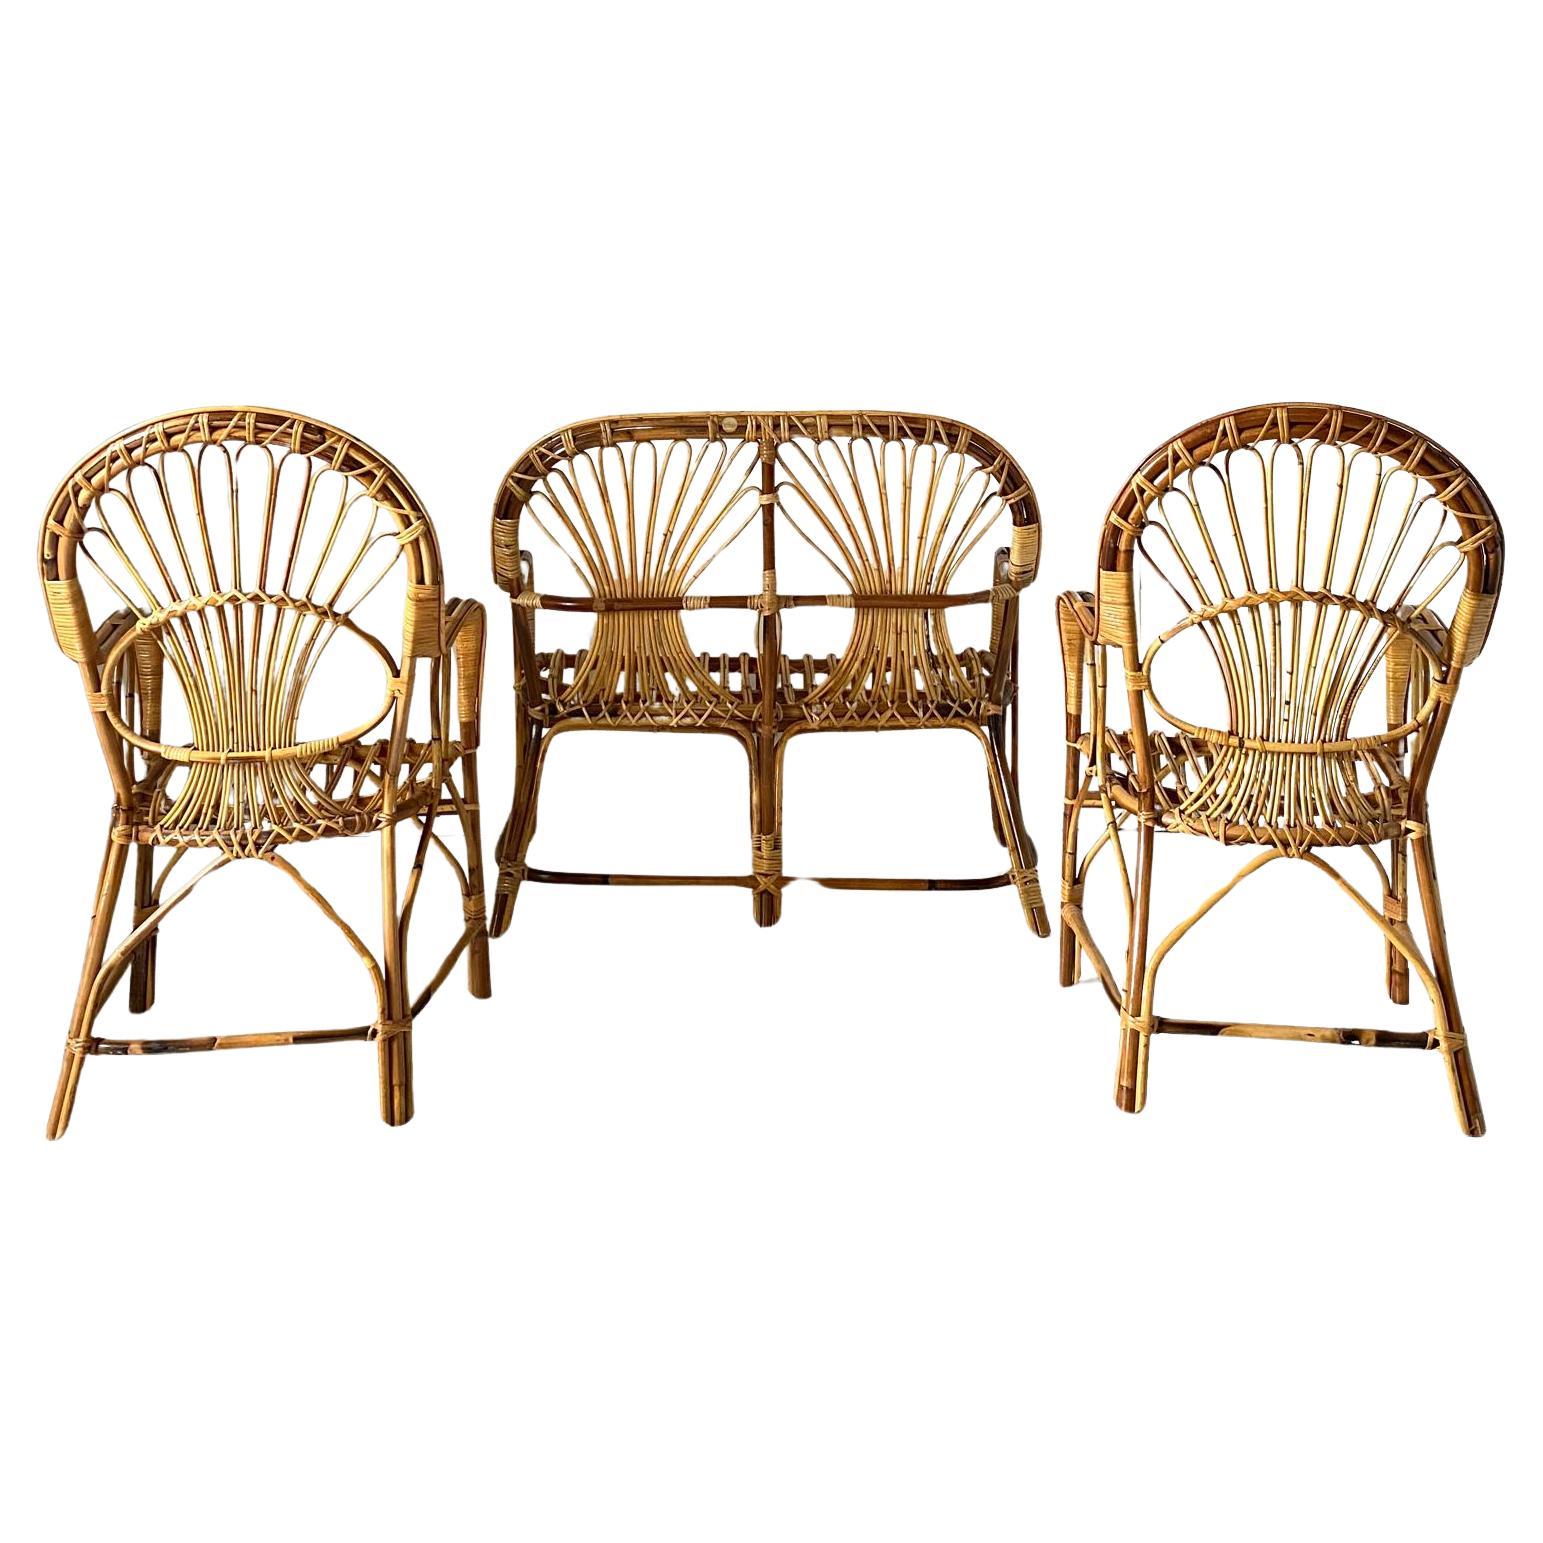 Italian Rattan Armchairs and Sofa Garden Set attributed to Franco Albini,  Italy 1960's For Sale